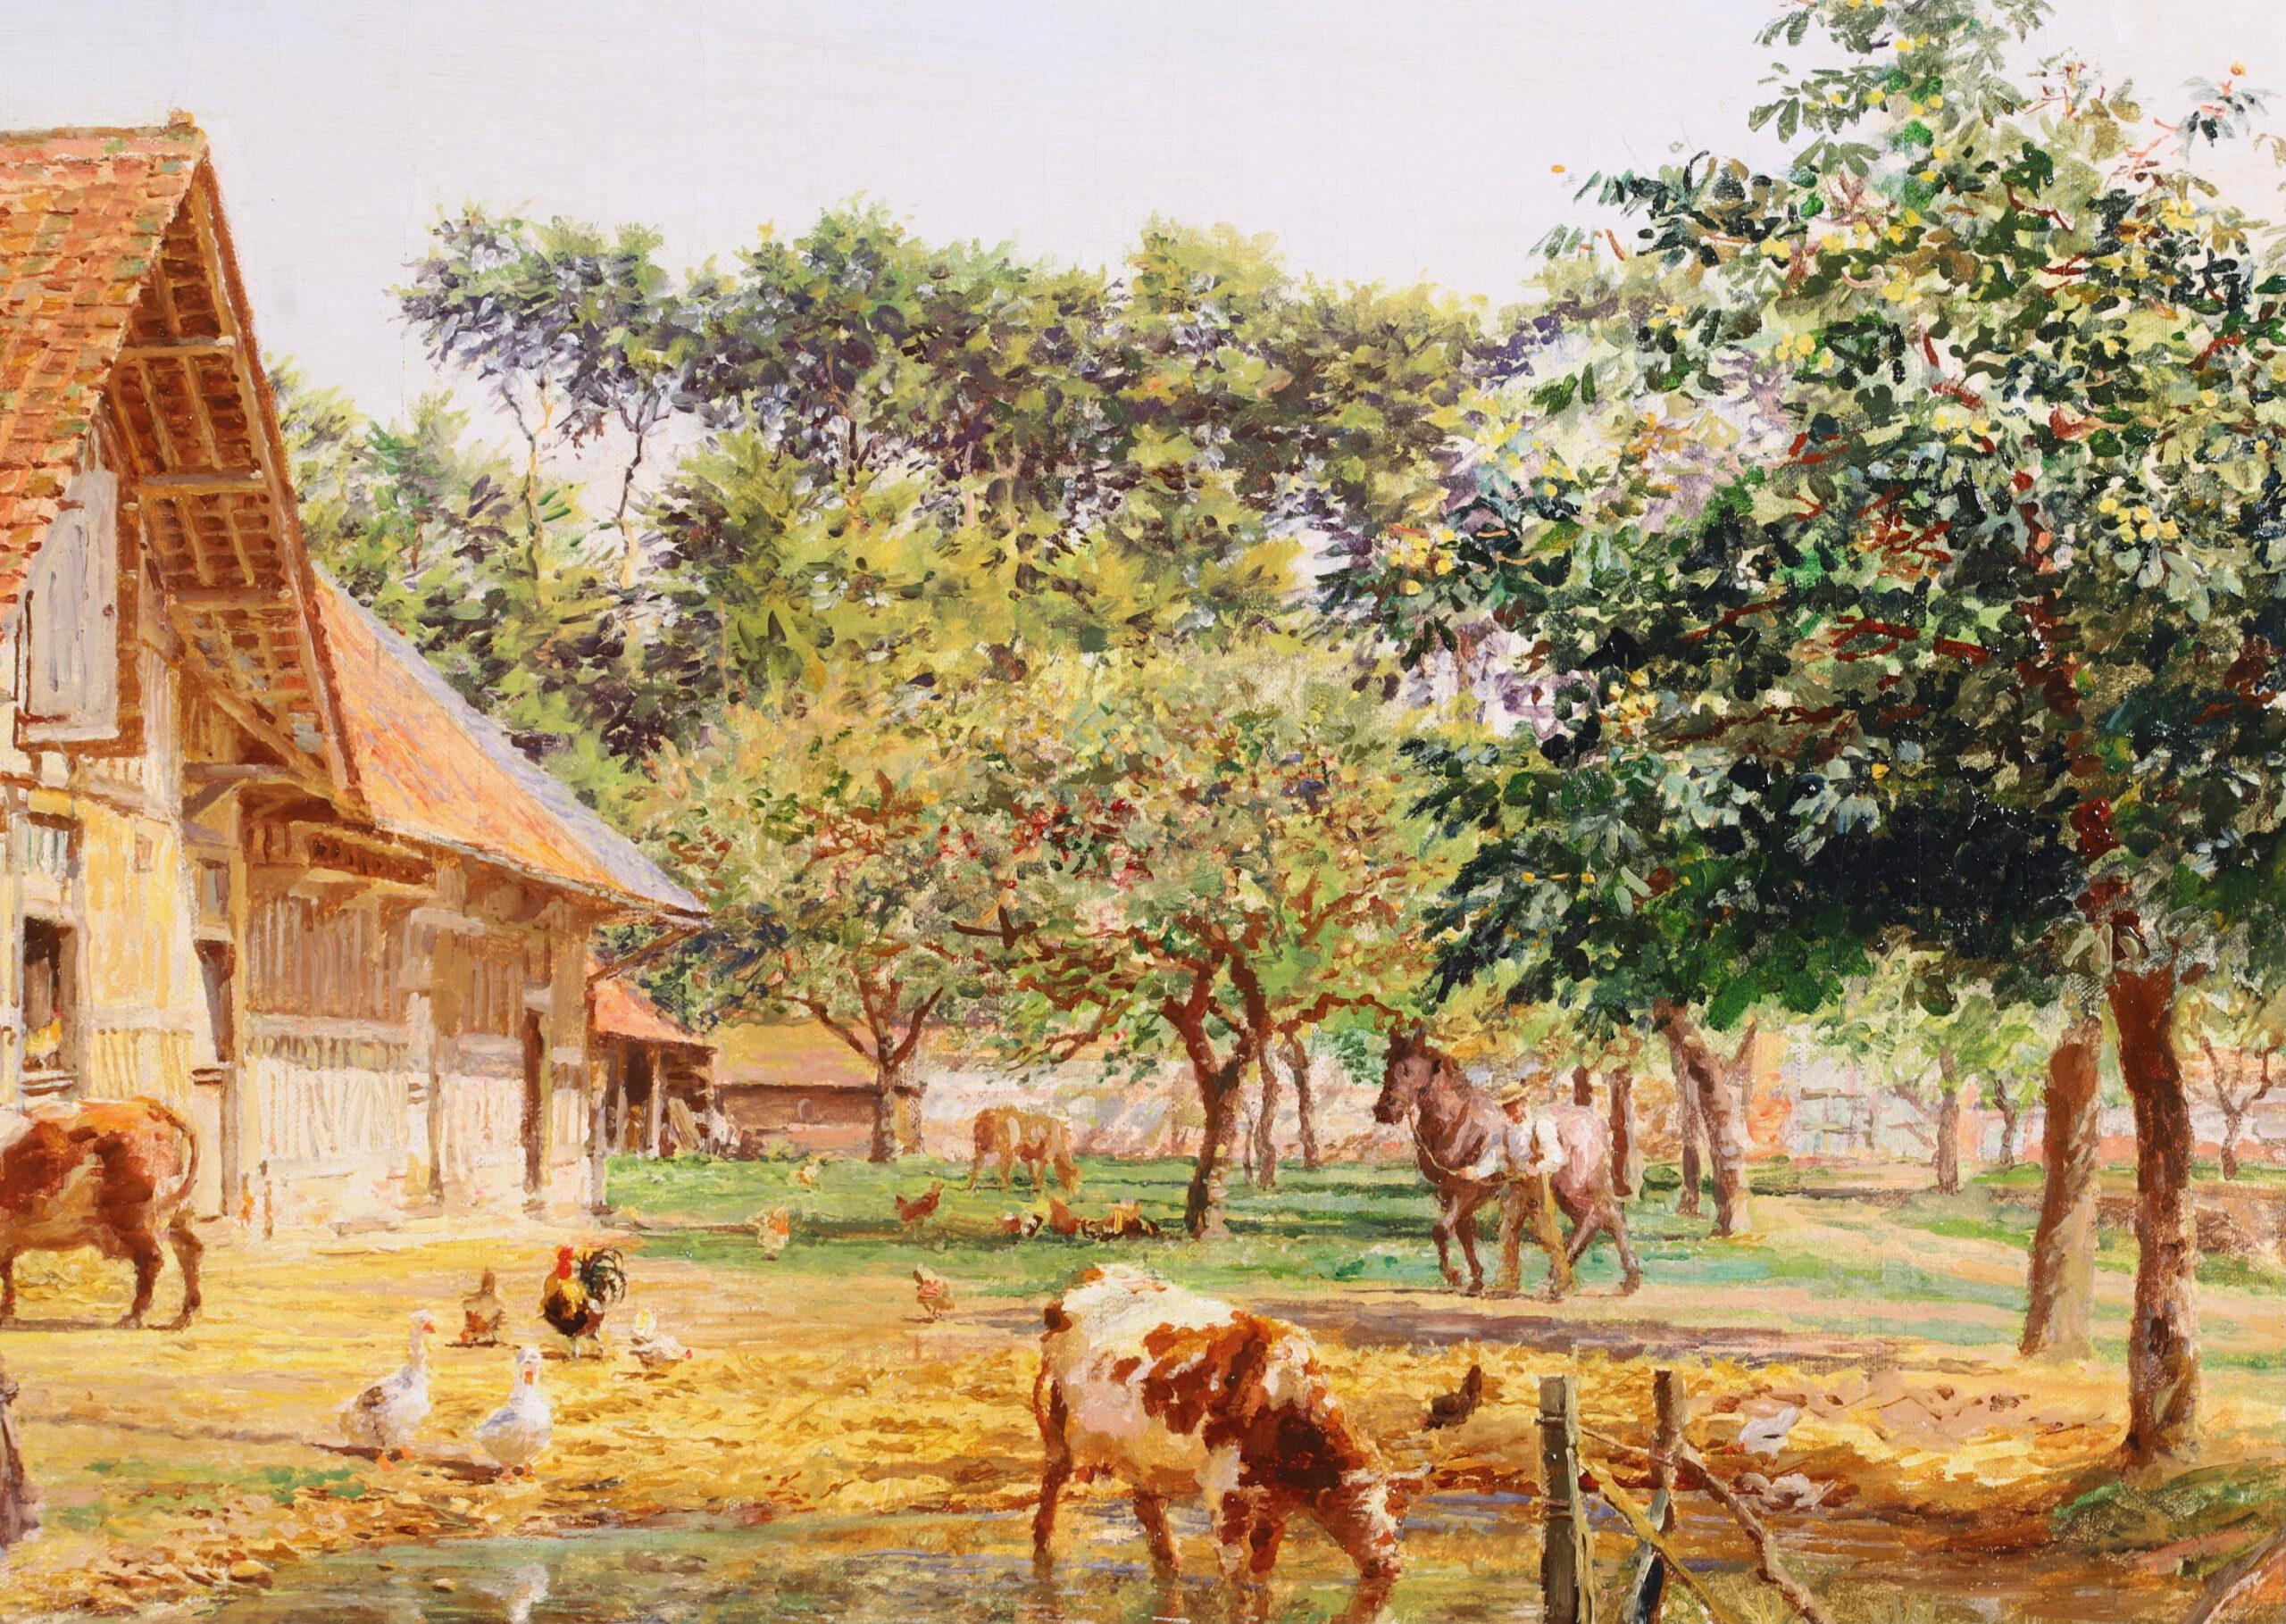 Signed landscape oil on canvas circa 1890 by French Academic painter Marie-Francois Firmin-Girard. The work depicts a farmyard filled with animals - cows, horses, chickens and ducks.

Signature:
Signed lower left

Dimensions:
Framed: